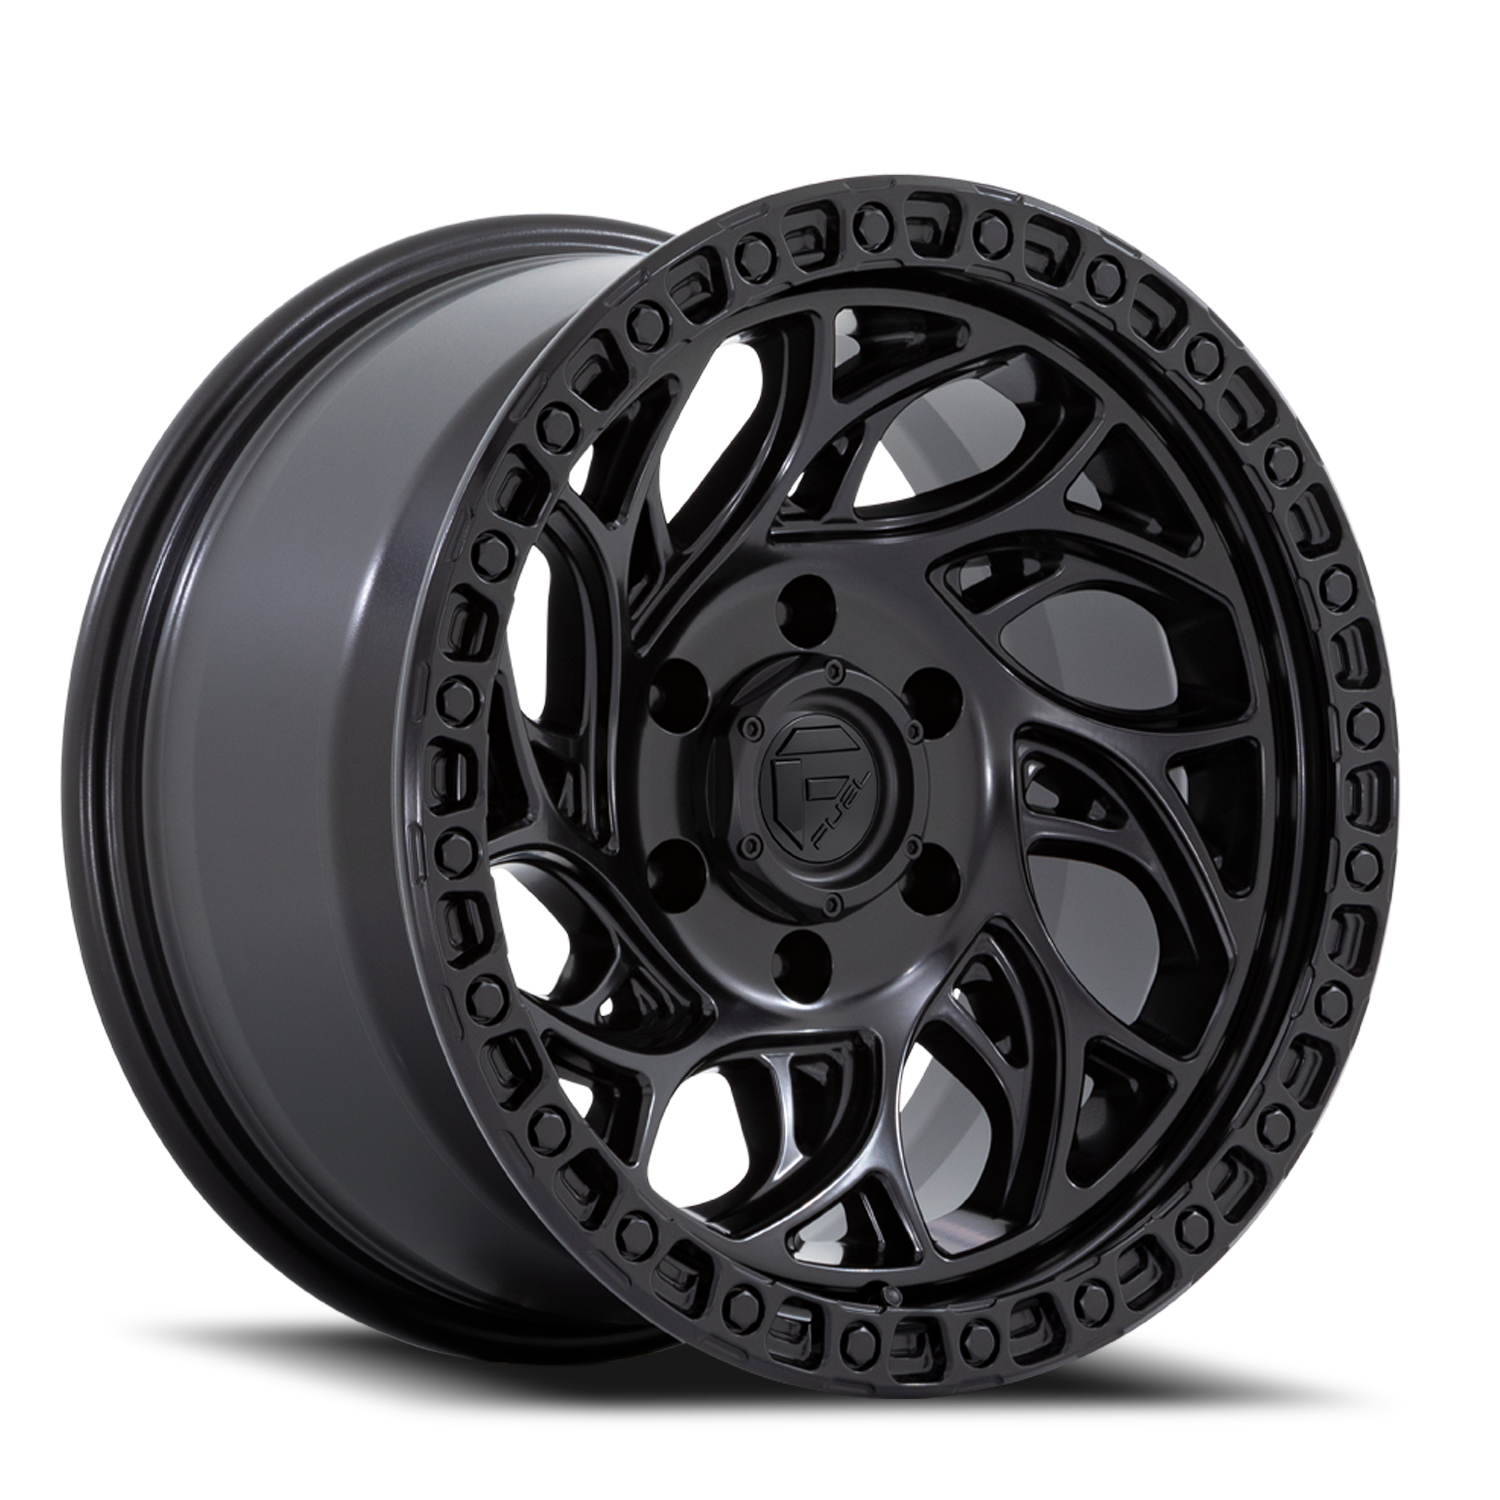 Aluminum Wheels 18X9 Runner OR D852 5 On 150 Blackout 110.1 Bore 1 Offset Fuel Off Road Wheels